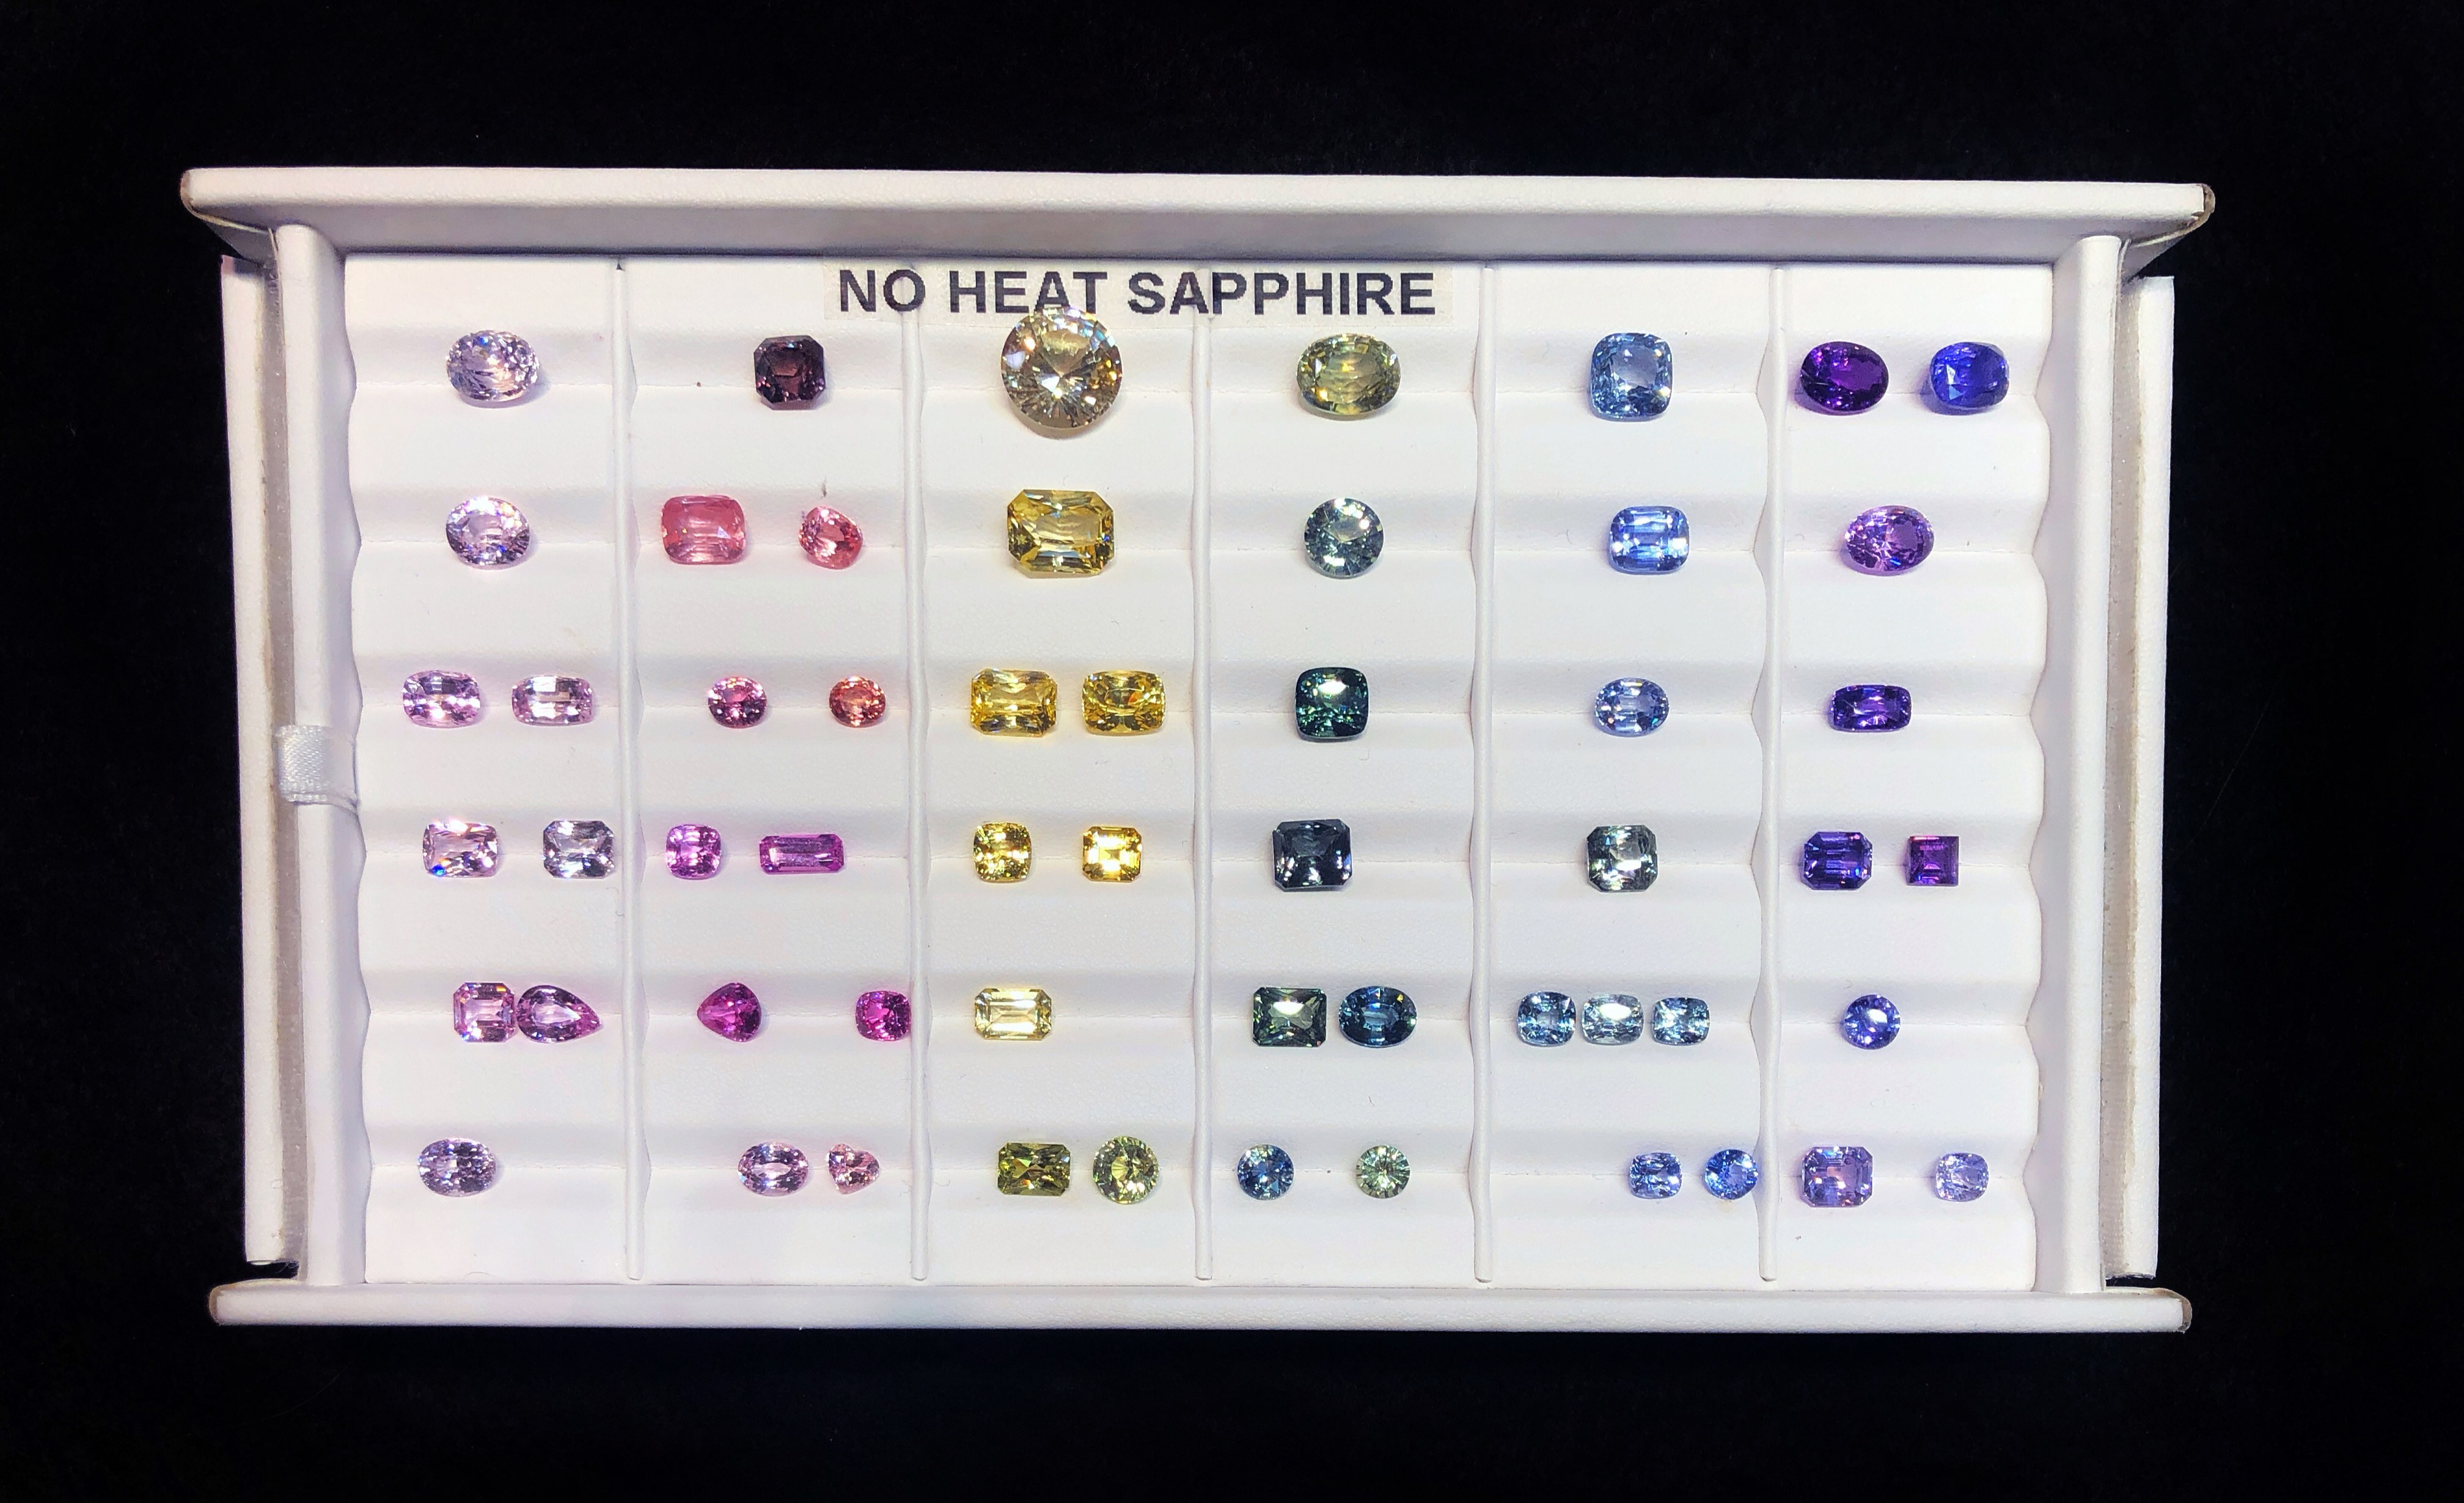 A delicious selection of glorious no heat sapphires from Kimberly Collins Colored Gems, at AGTA GemFair 2019!